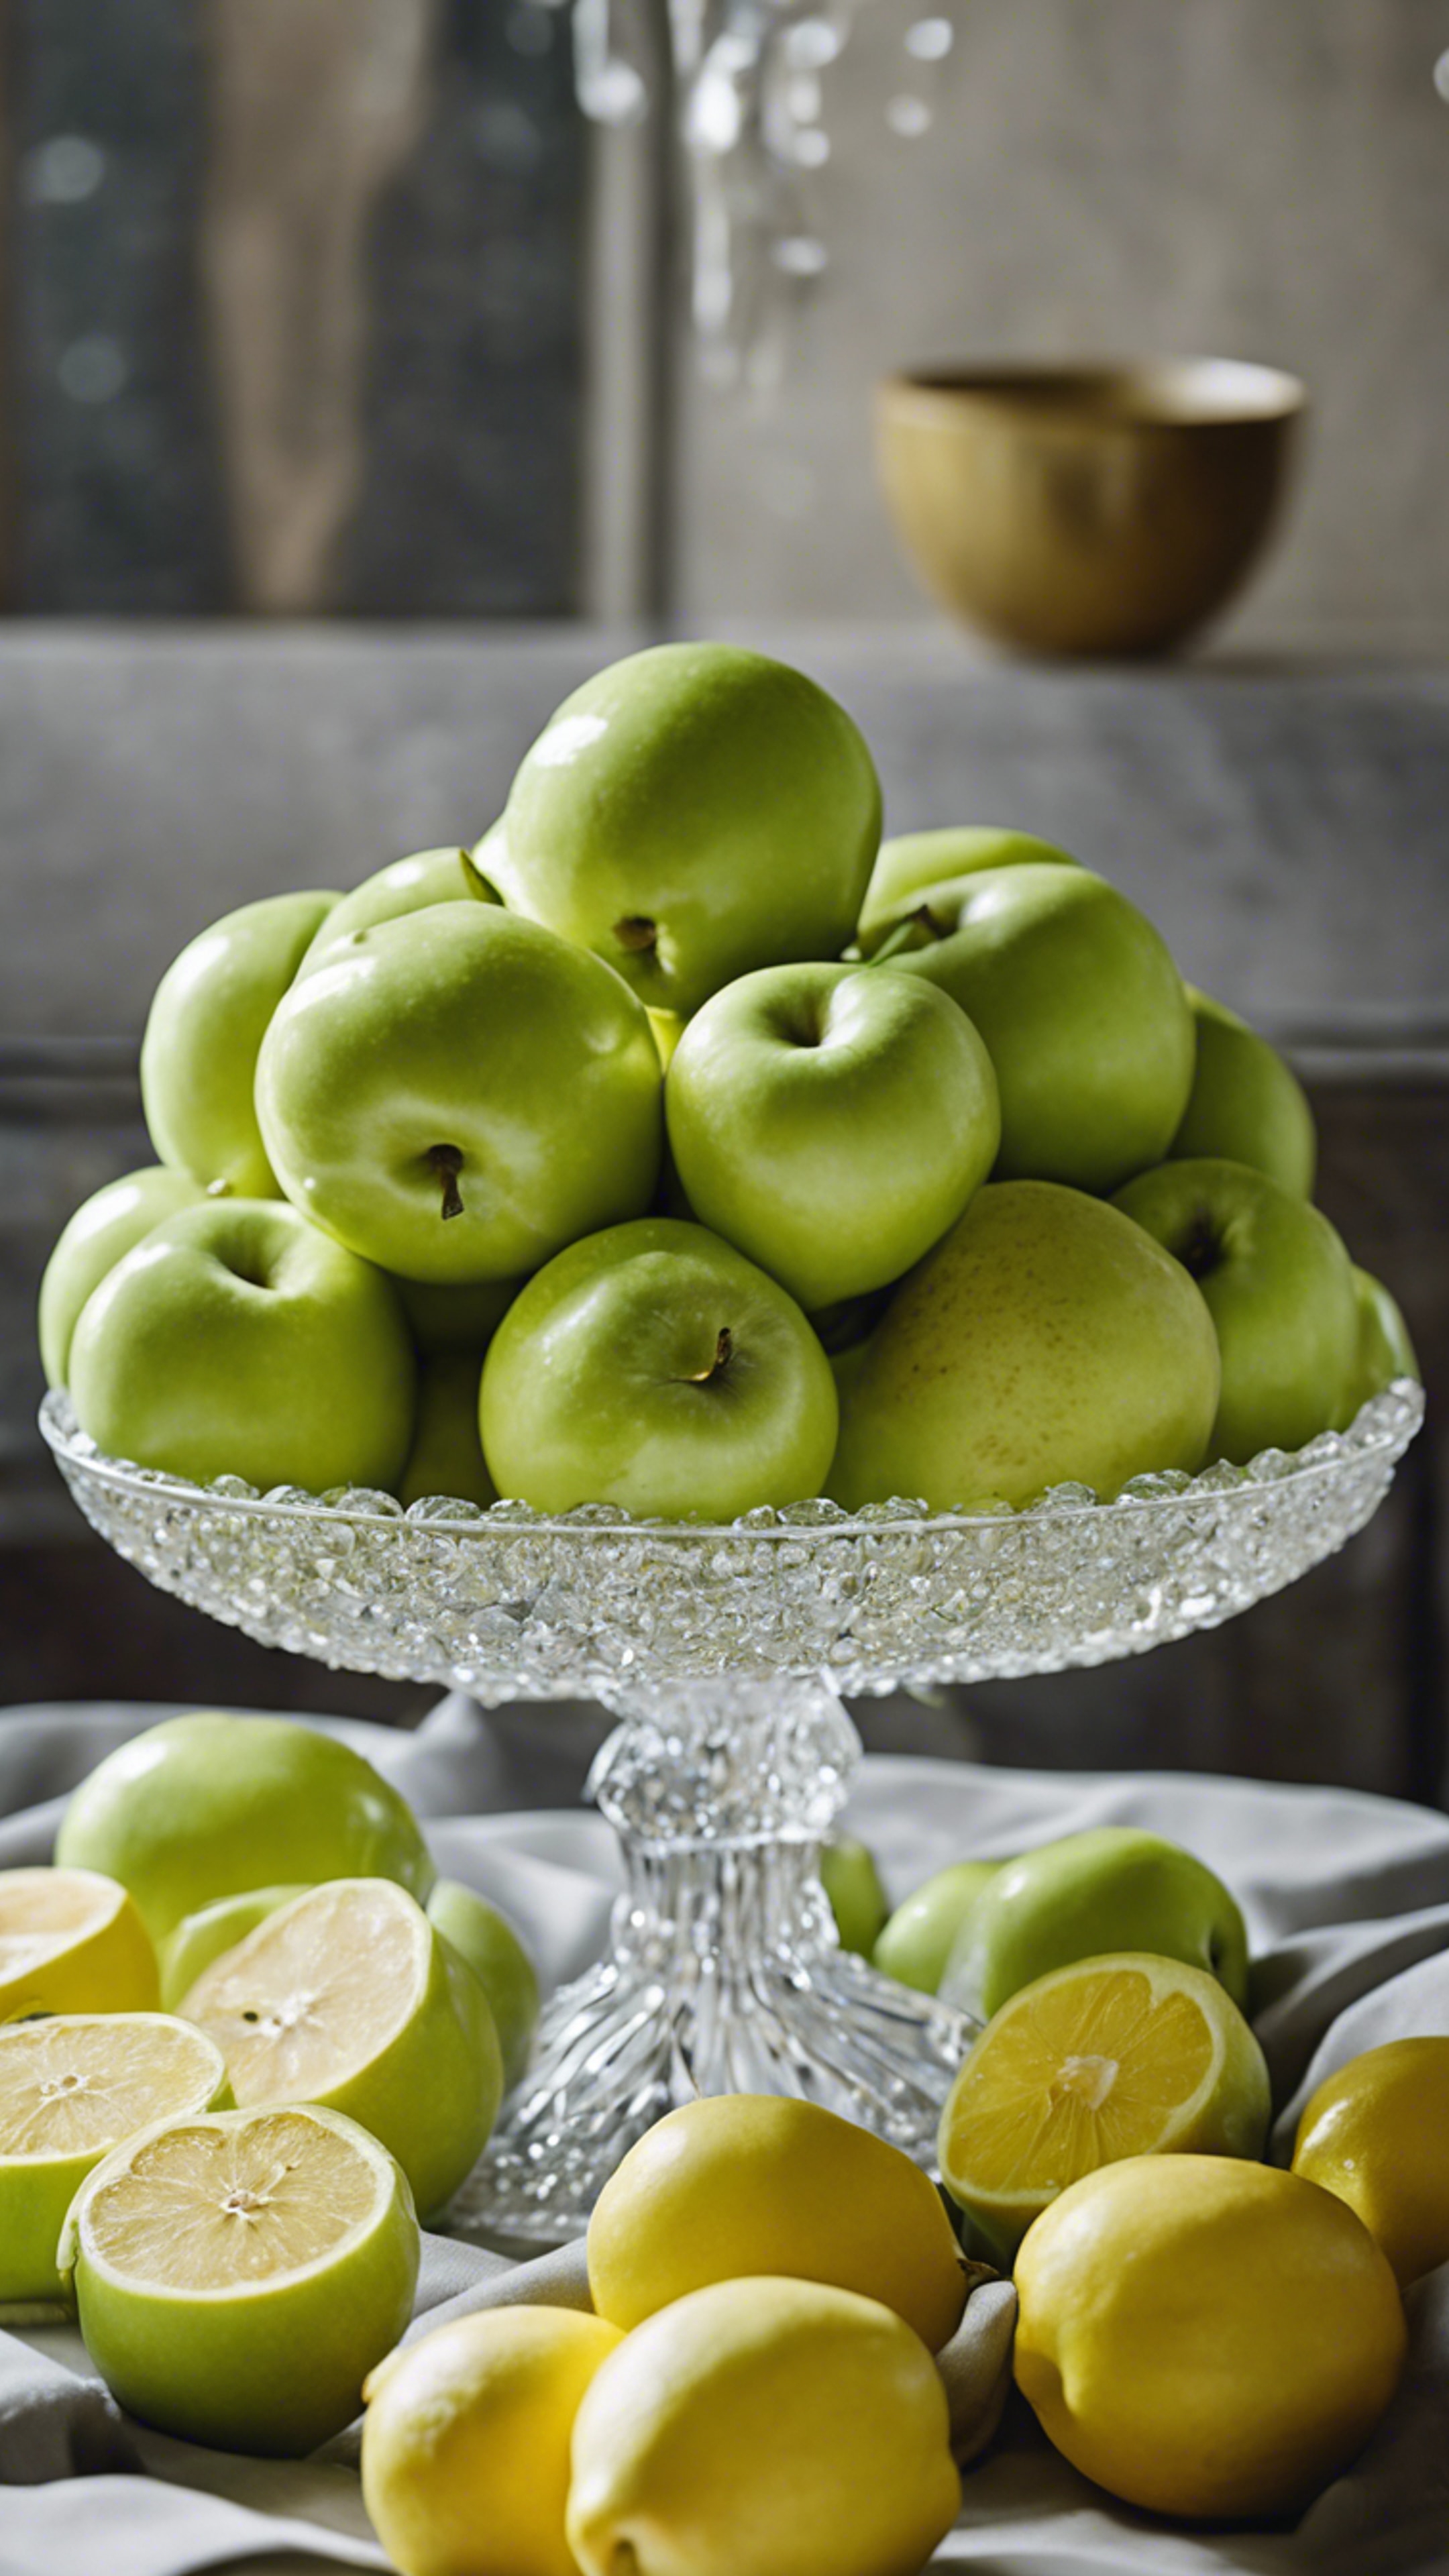 A still life of green apples with yellow lemons arranged in a crystal bowl. Wallpaper[302de0b01c49464c843a]